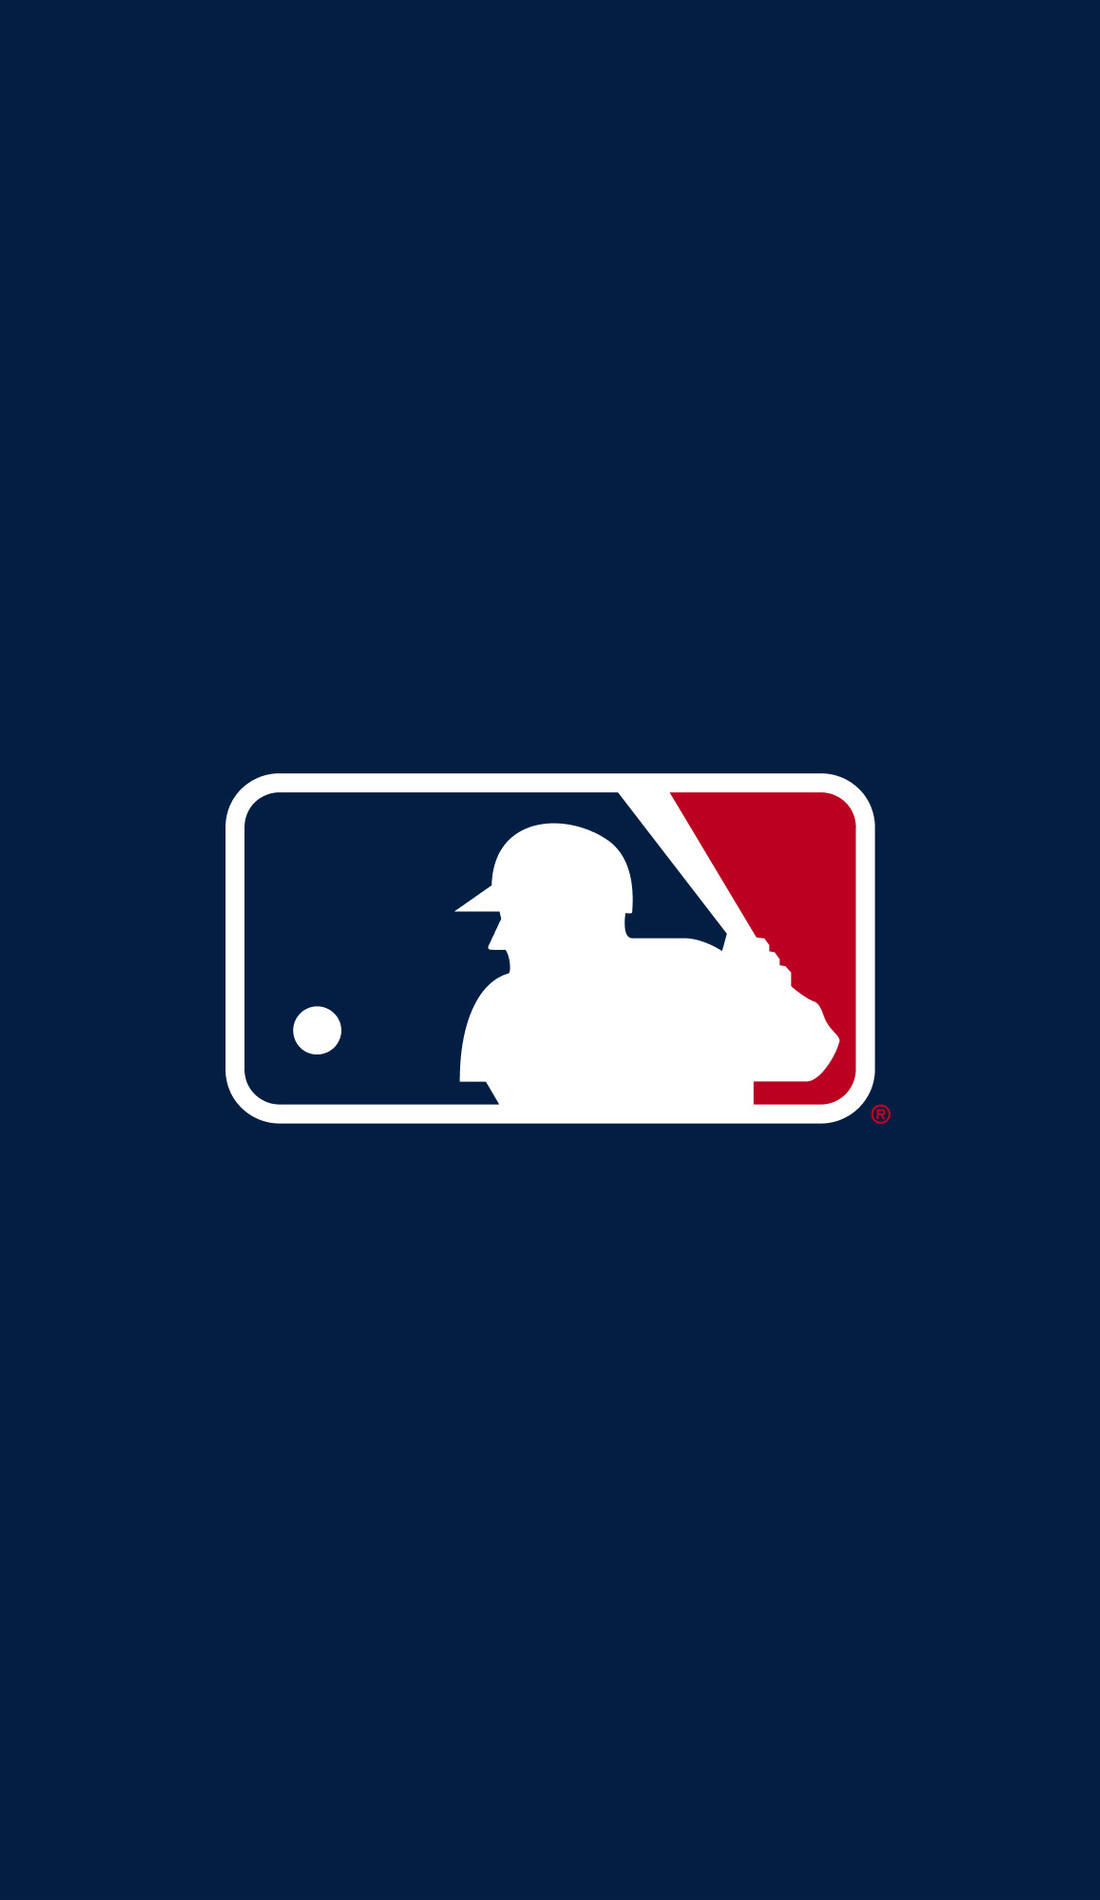 MLB playoff schedule 2020 Full bracket dates times TV channels for  every series  Sporting News